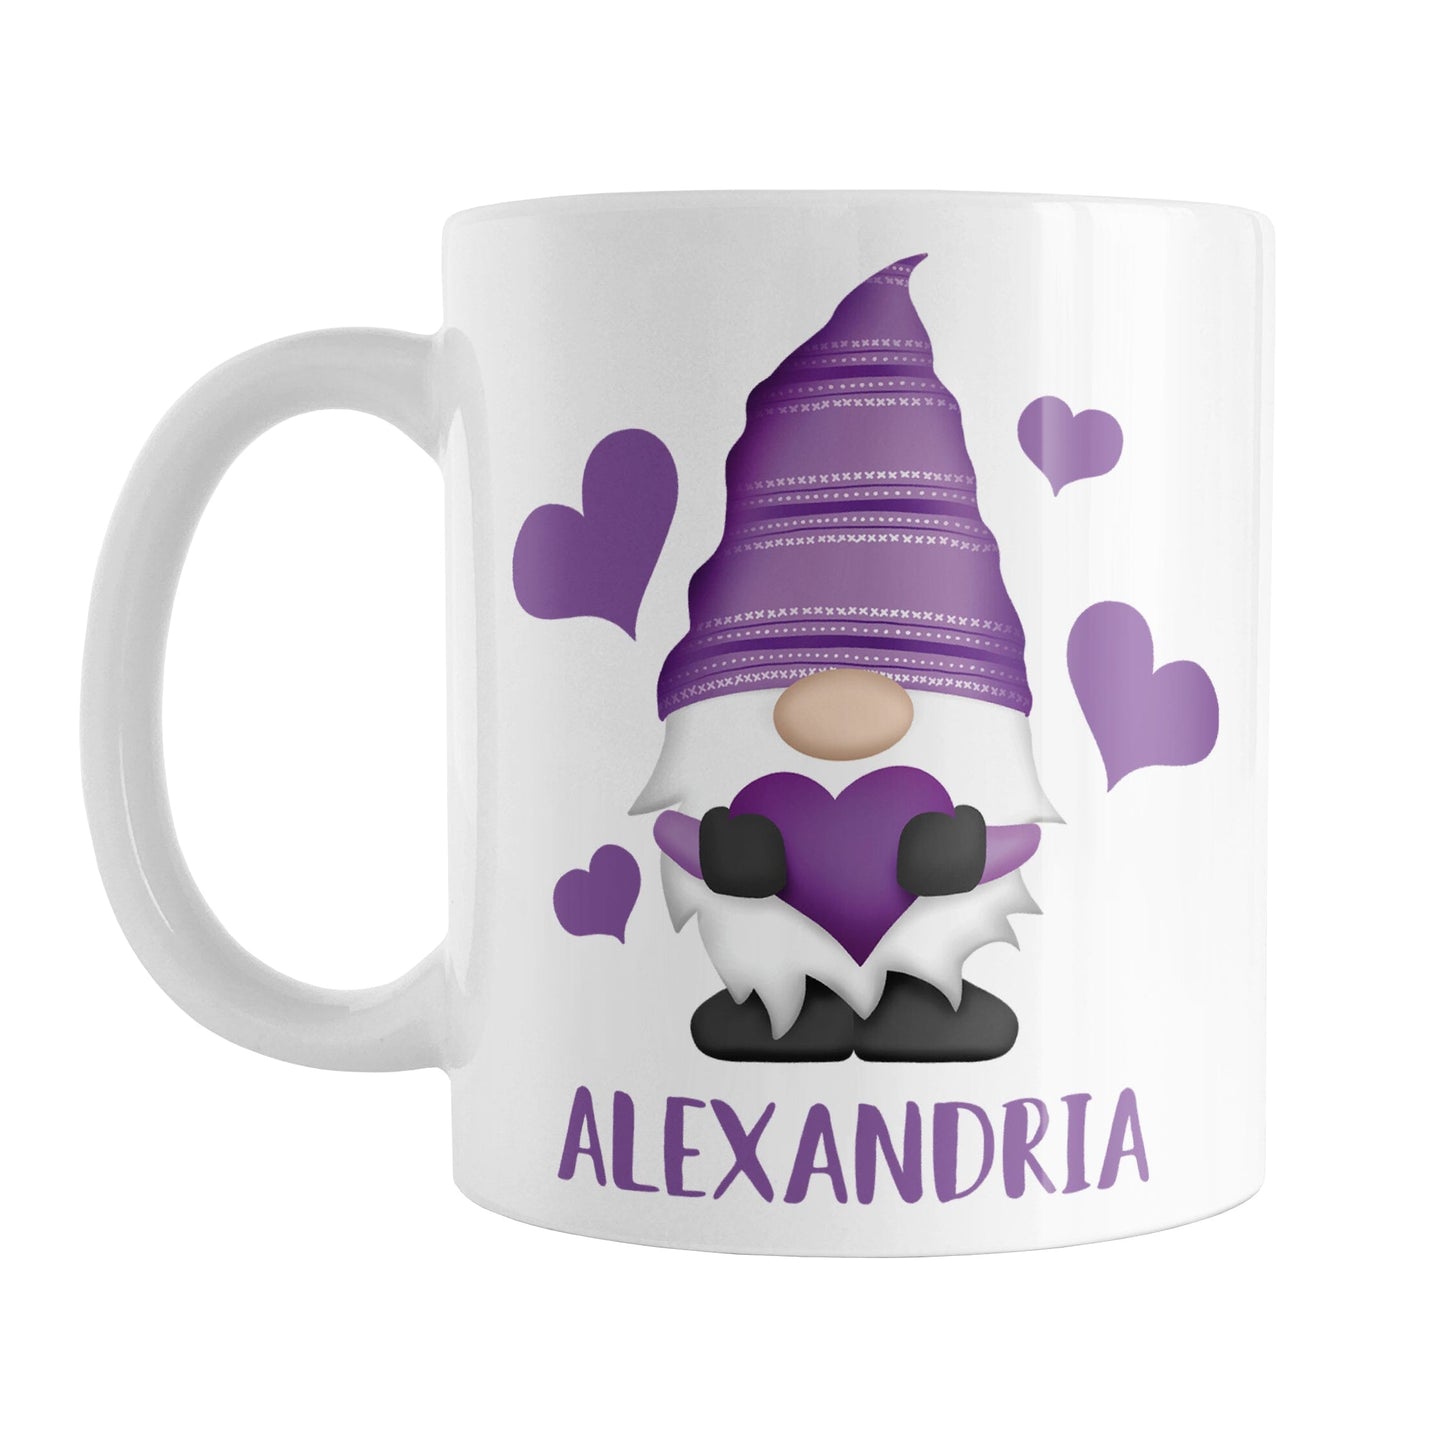 Personalized Purple Heart Gnome Mug (11oz) at Amy's Coffee Mugs. A ceramic coffee mug designed with an illustration of an adorable gnome with a purple pointed hat, holding a big purple heart, with bold purple hearts around it. Below the gnome is your personalized name custom printed in a cute purple font. This charming gnome and personalized name are printed on both sides of the mug.